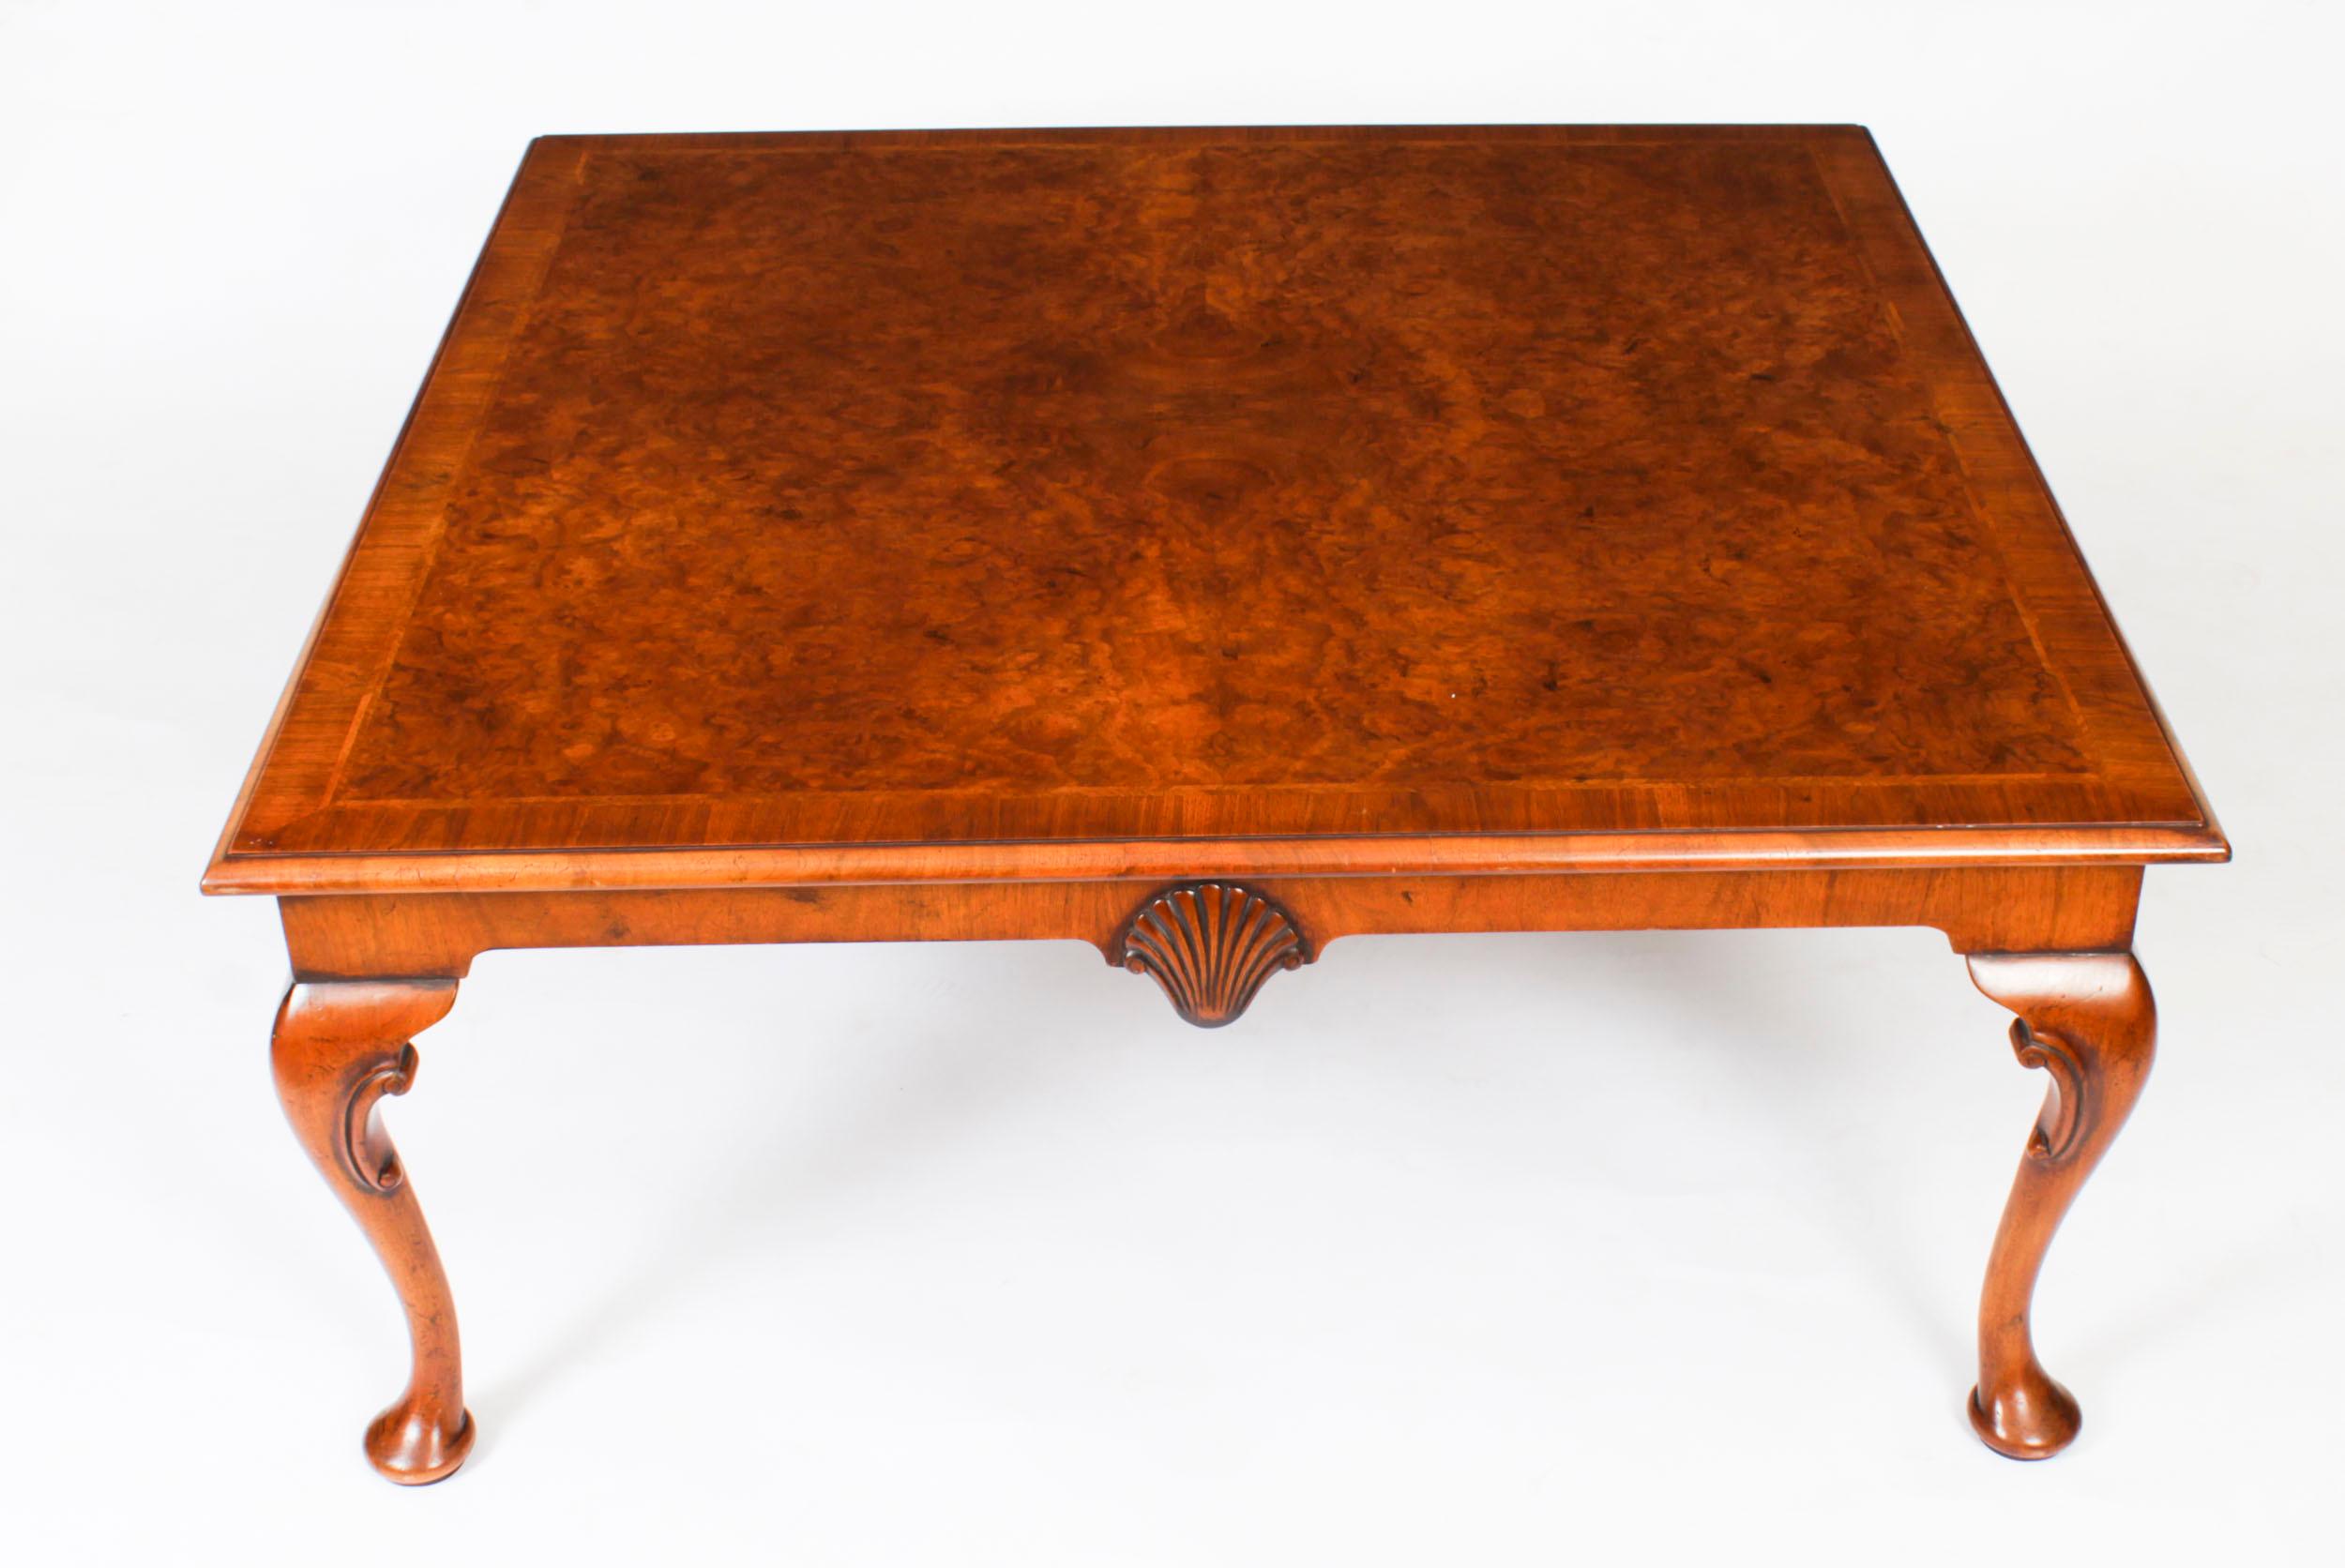 This is a stunningly beautiful English antique burr walnut coffee table, circa 1920 in date. 

It features a quarter veneered burr walnut, crossbanded and feather banded top with a moulded edge above a carved frieze, standing on well carved